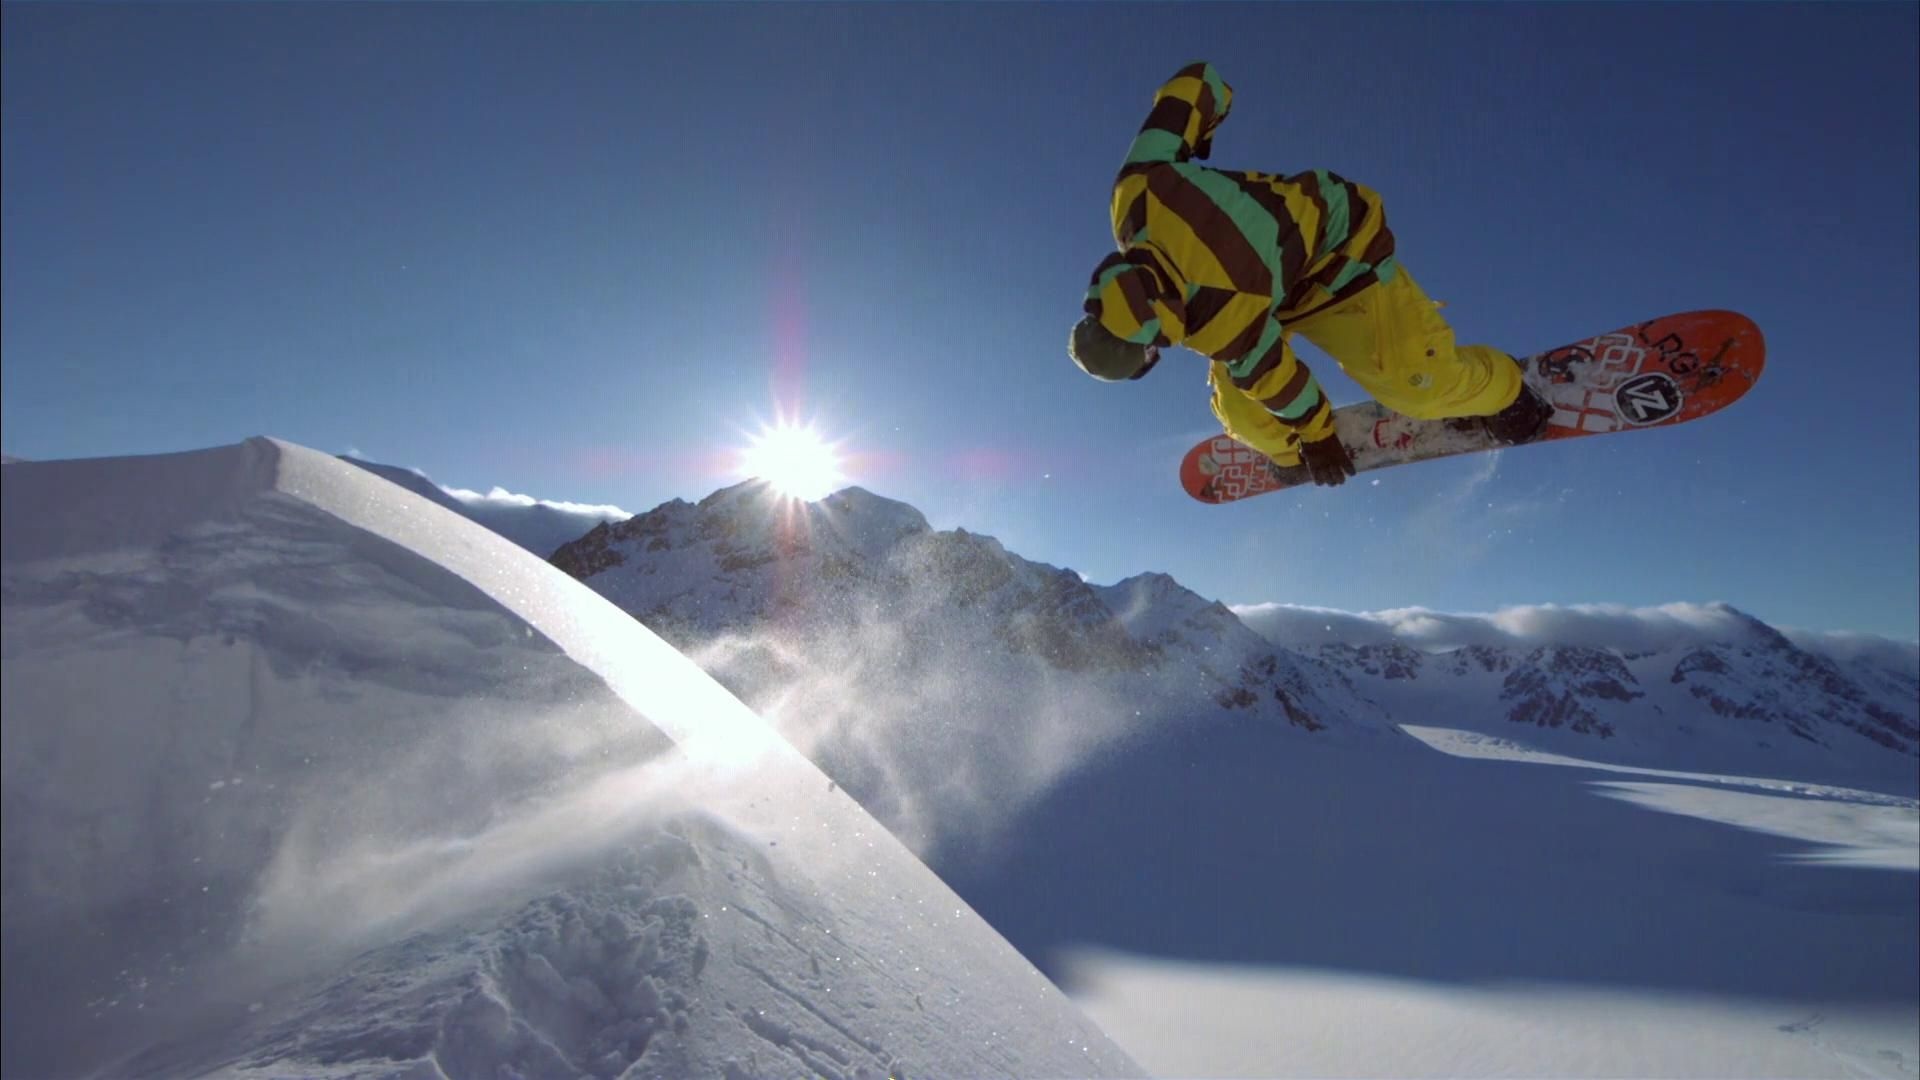 Snowboarding: Alpine snowboarding style, Big air combined style in the mountains, Red Bull professional snowboarder. 1920x1080 Full HD Background.